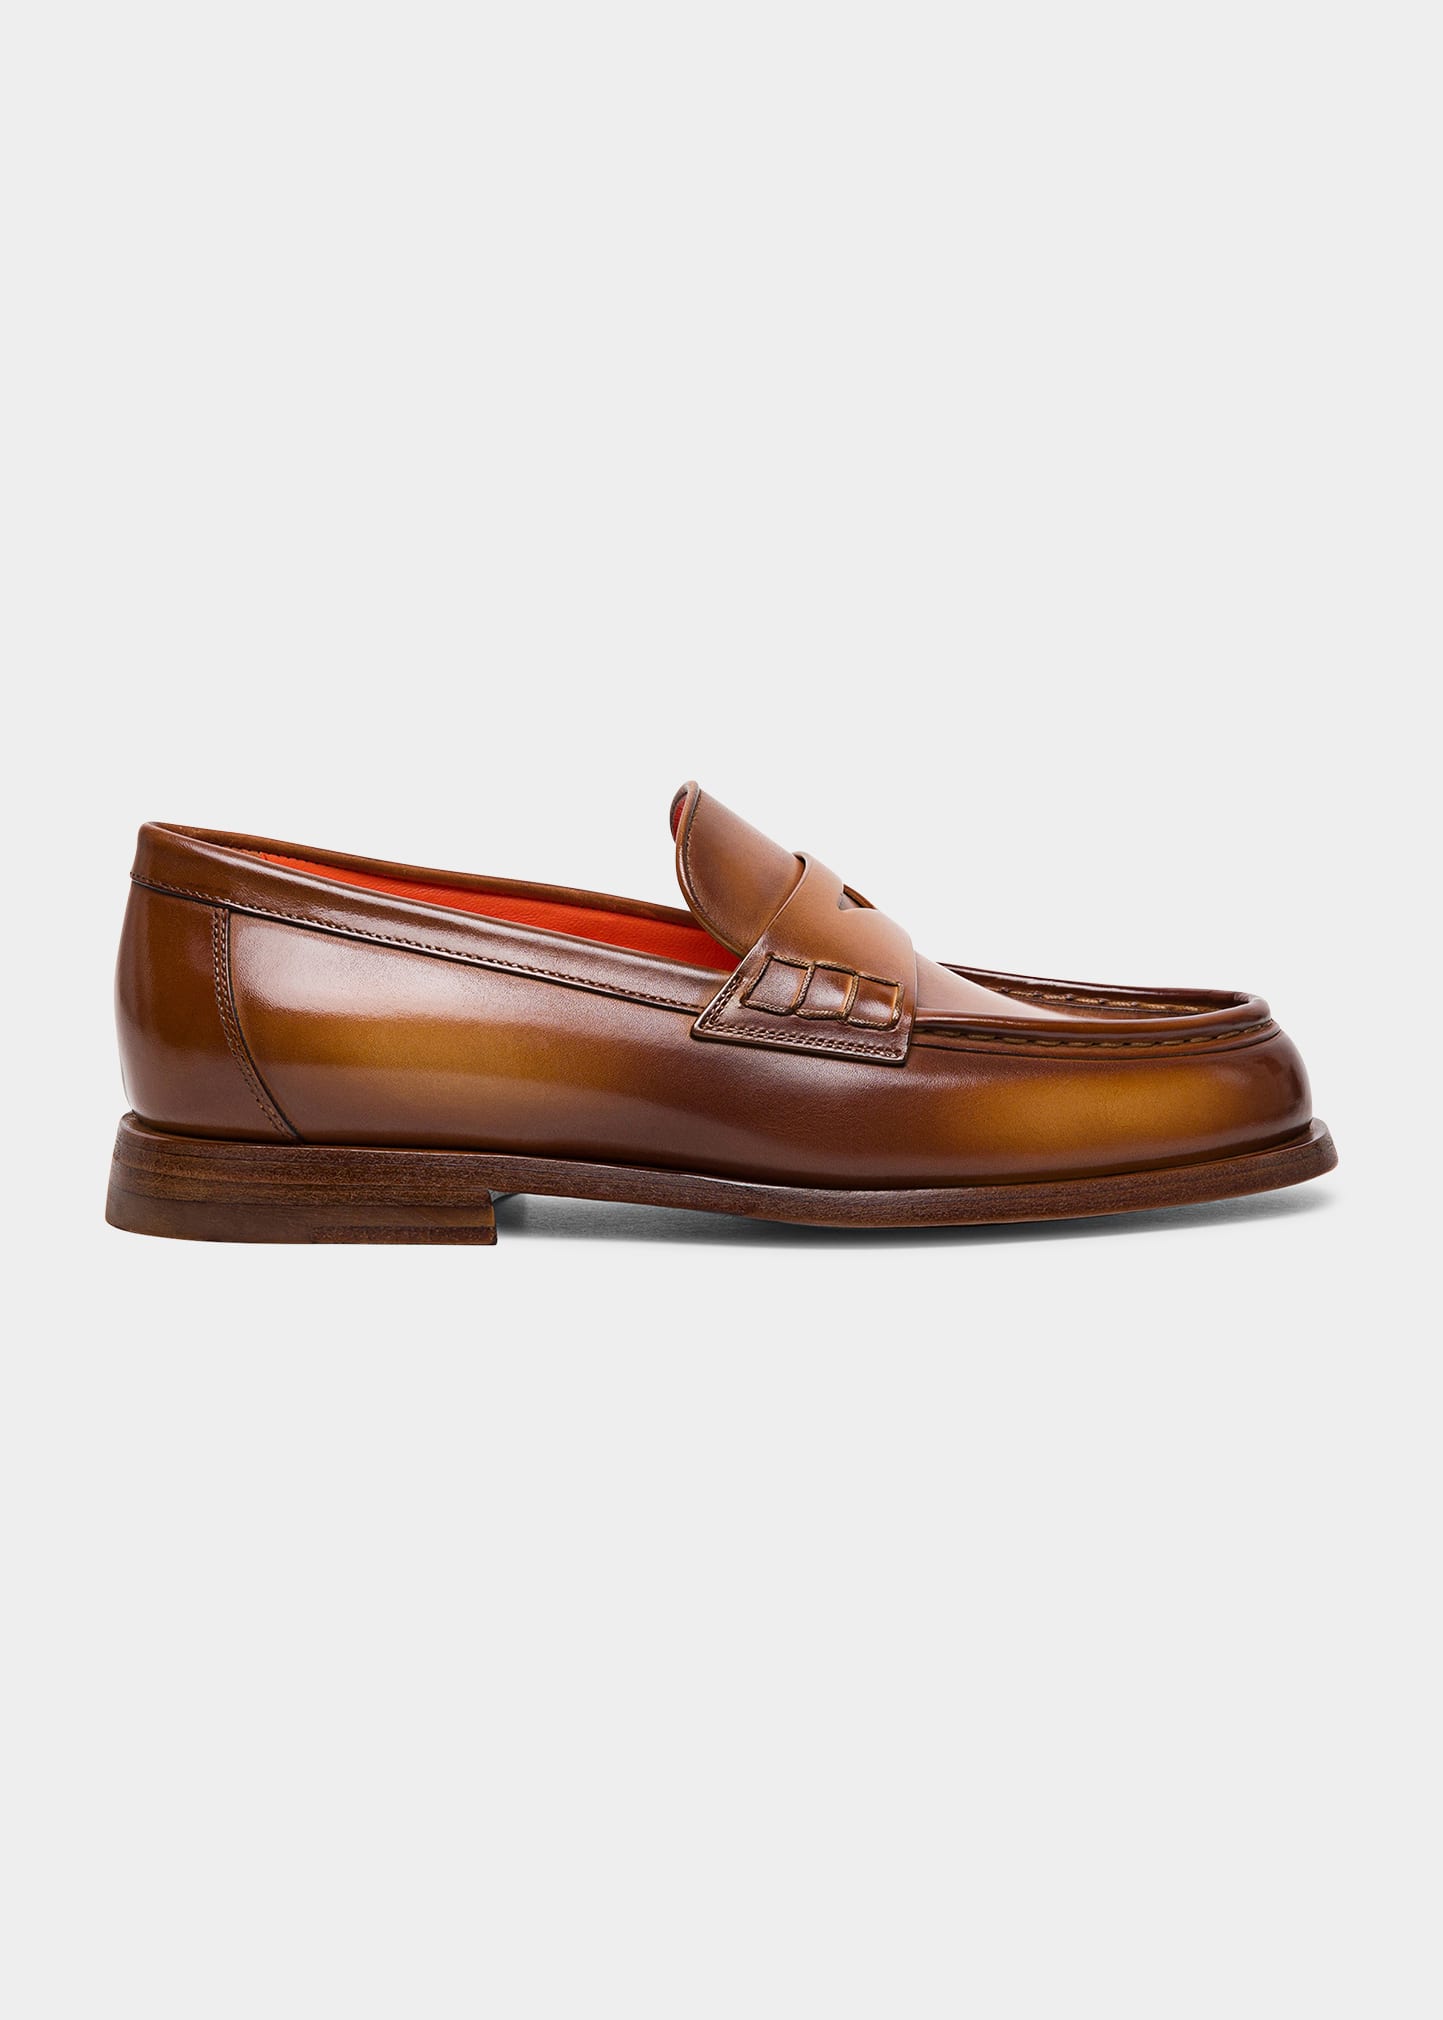 Santoni Airglow Classic Leather Penny Loafers